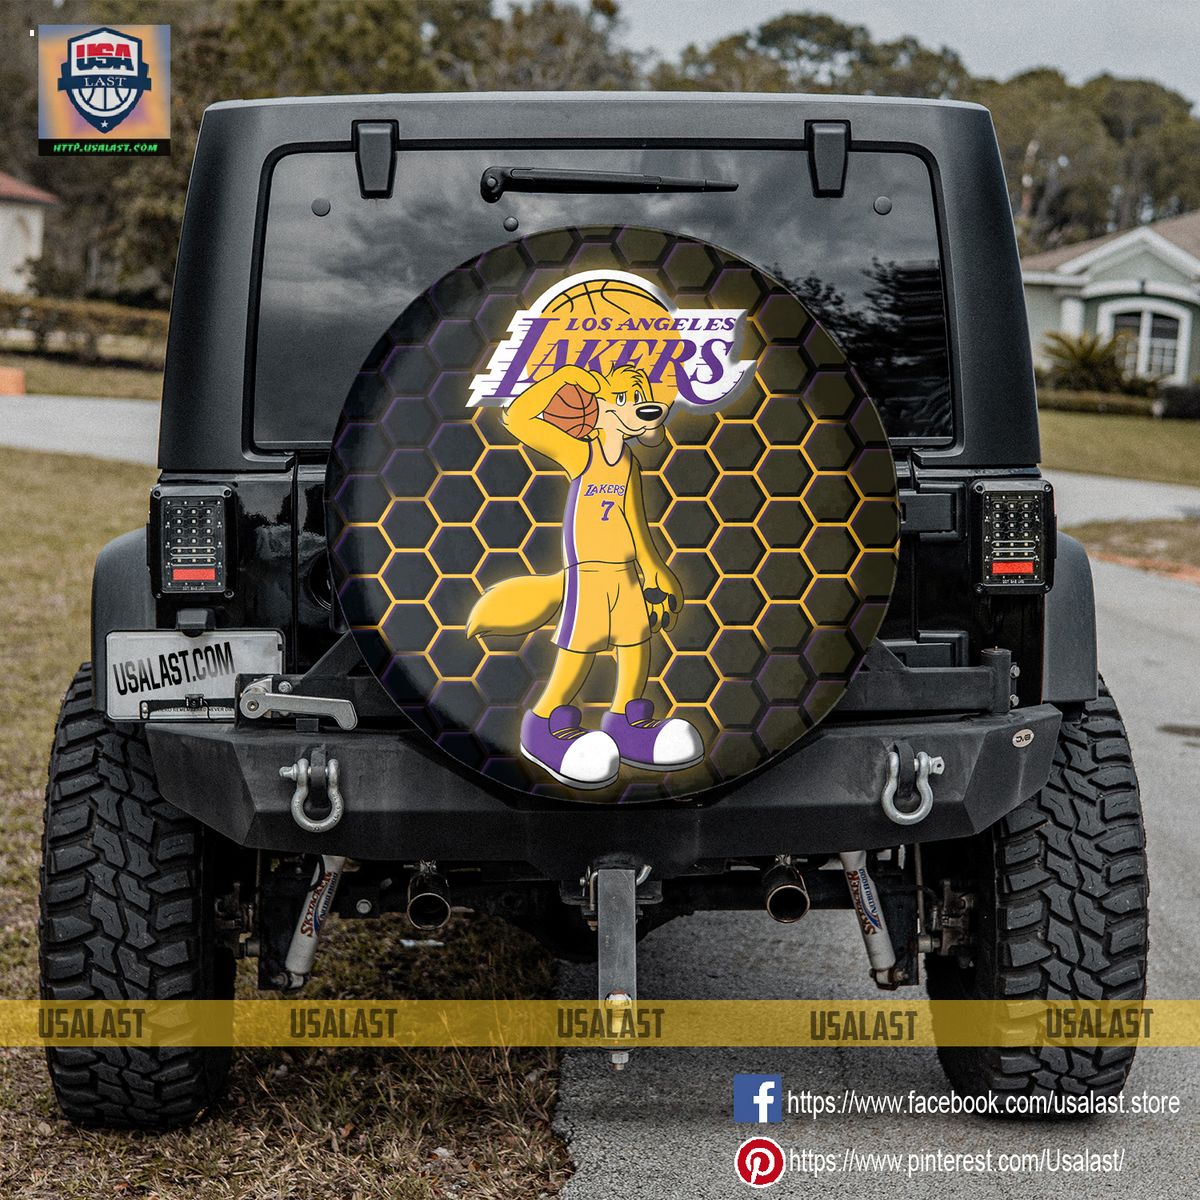 AMAZING Los Angeles Lakers NBA Mascot Spare Tire Cover